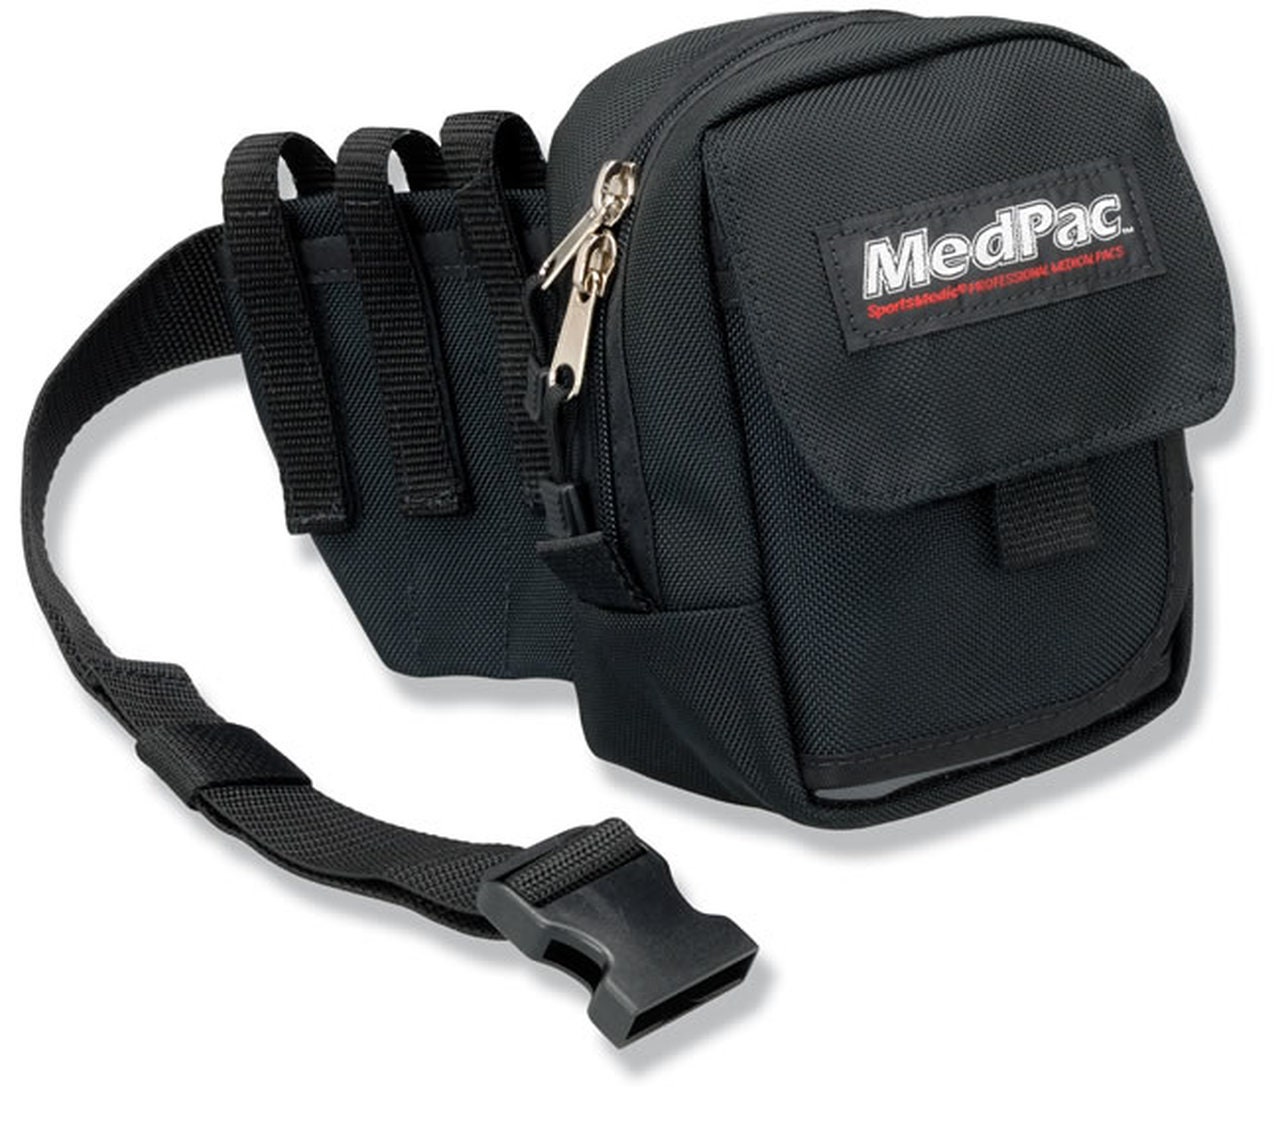 Embroidered Medical Bag | Perfect Gift for Sports Medicine Professionals